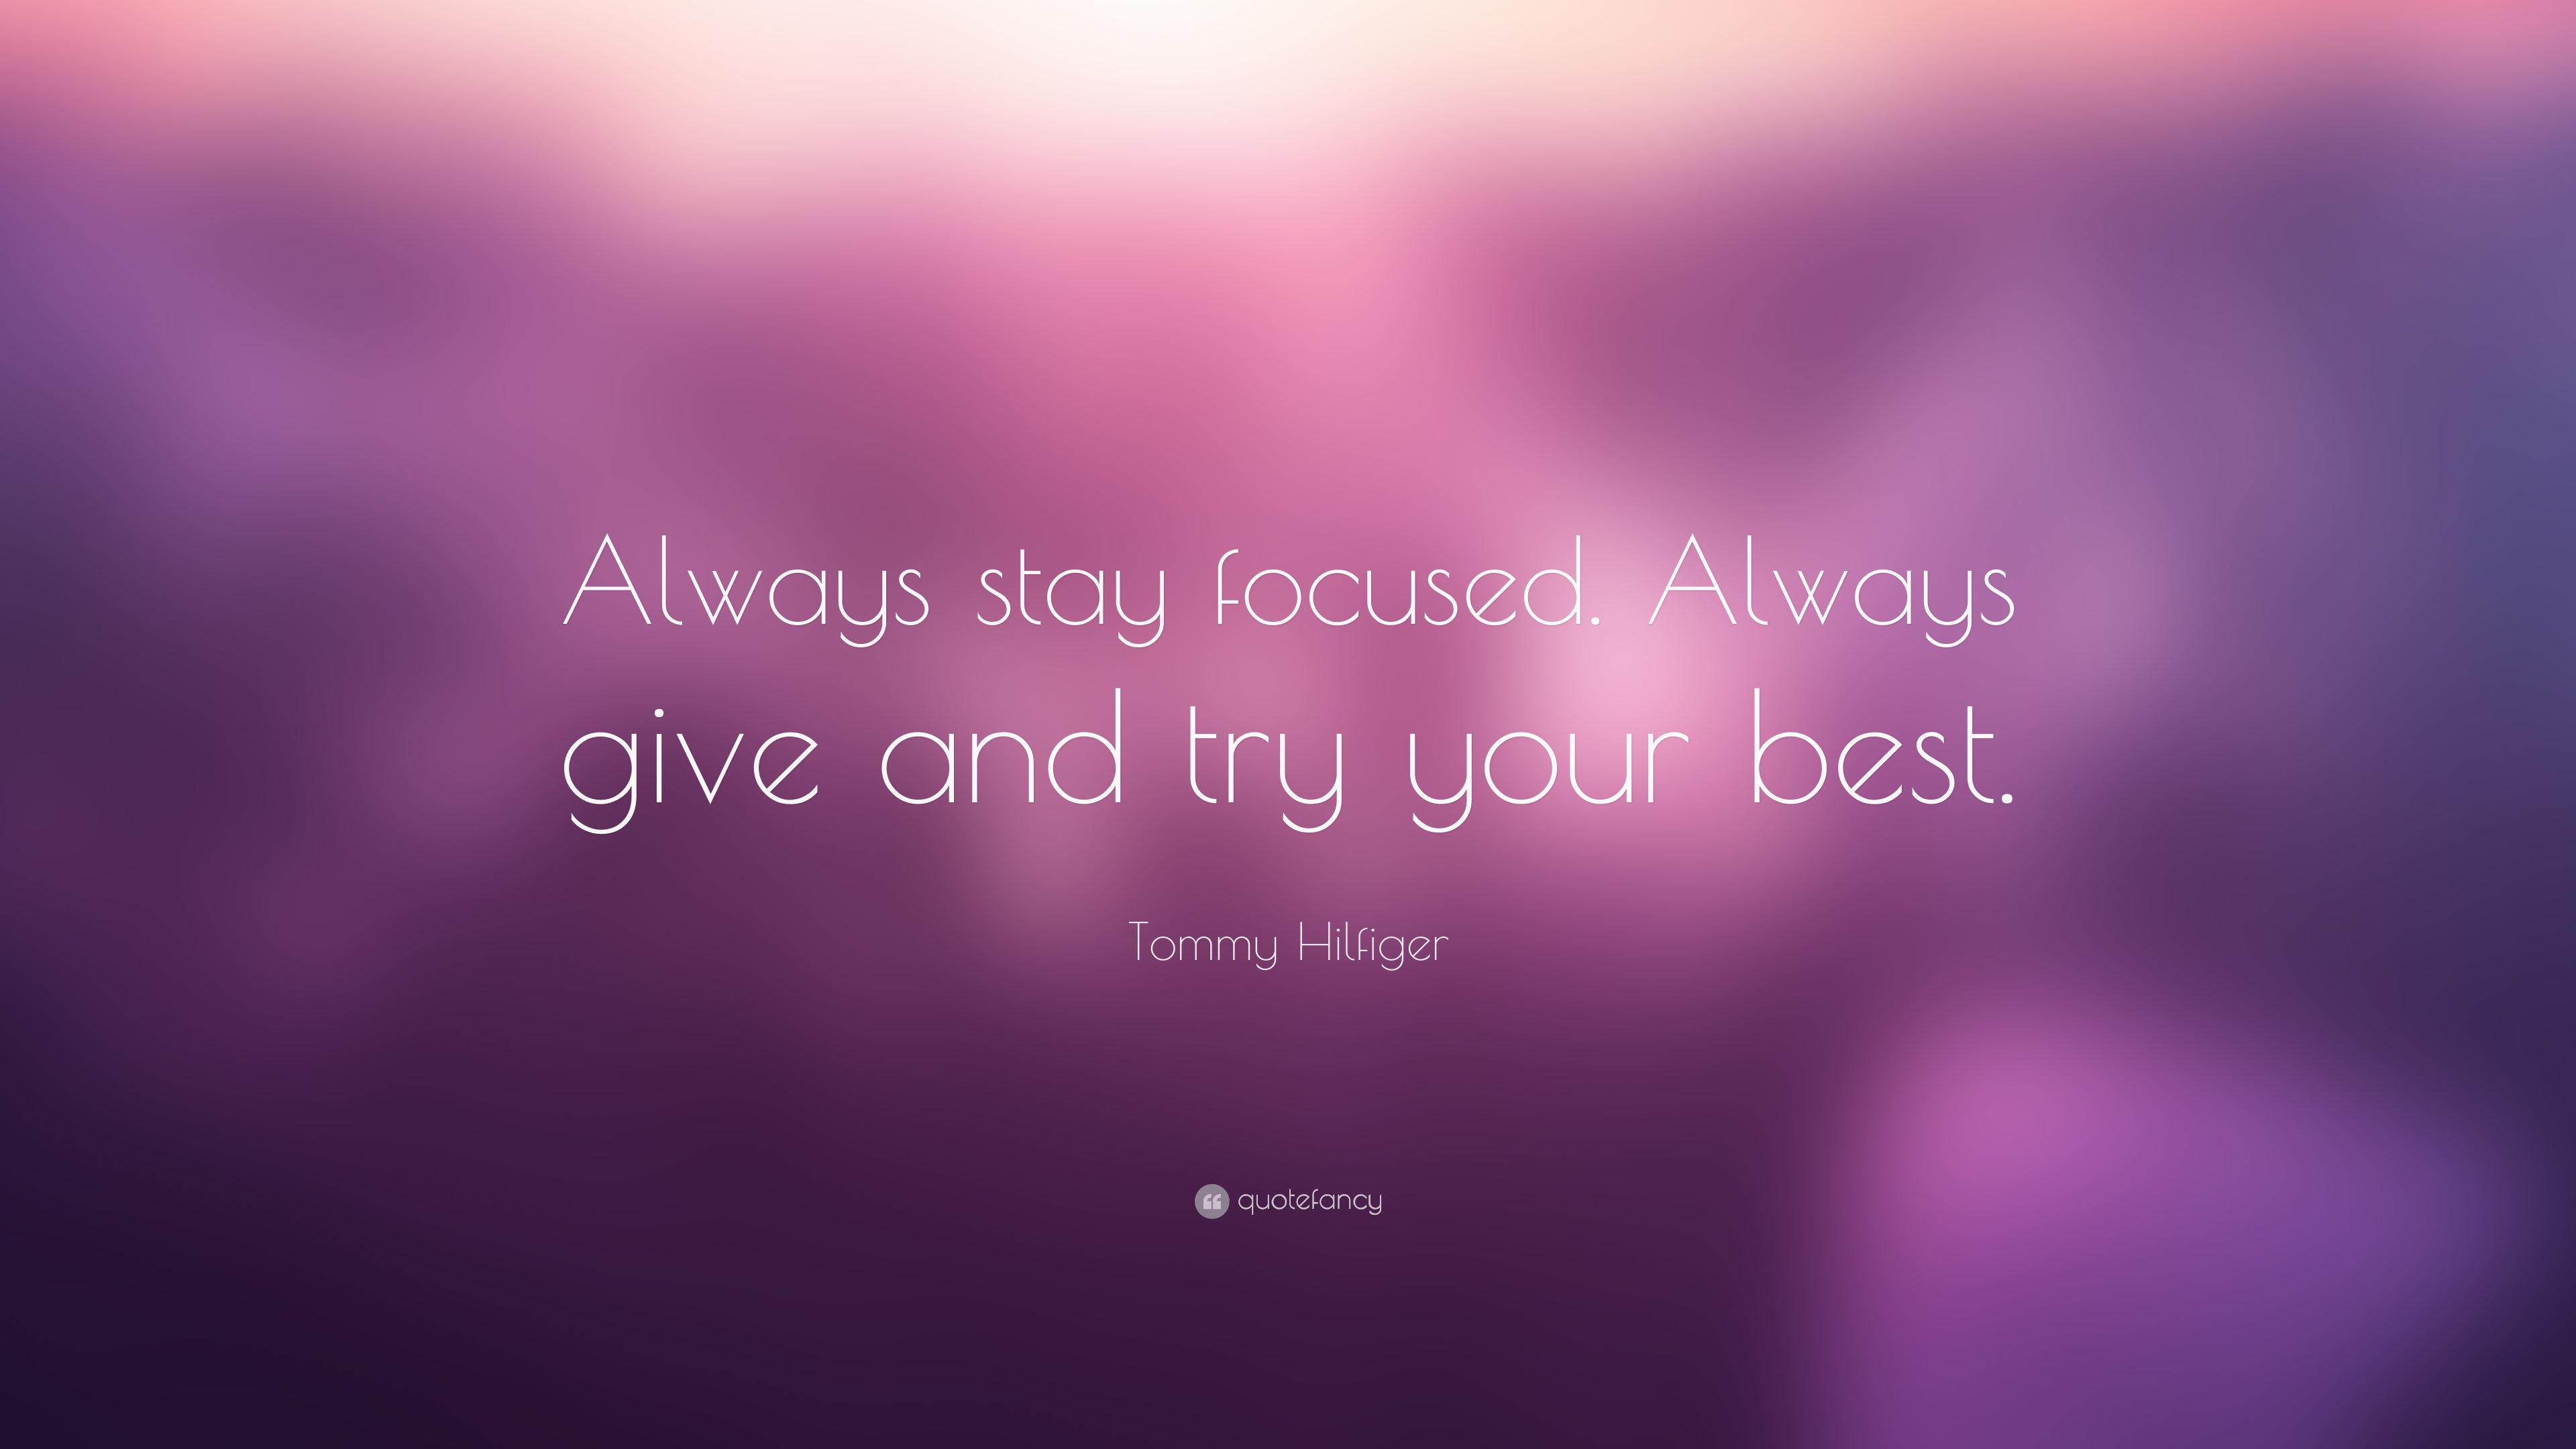 Tommy Hilfiger Quote: “Always stay focused. Always give and try your best.”